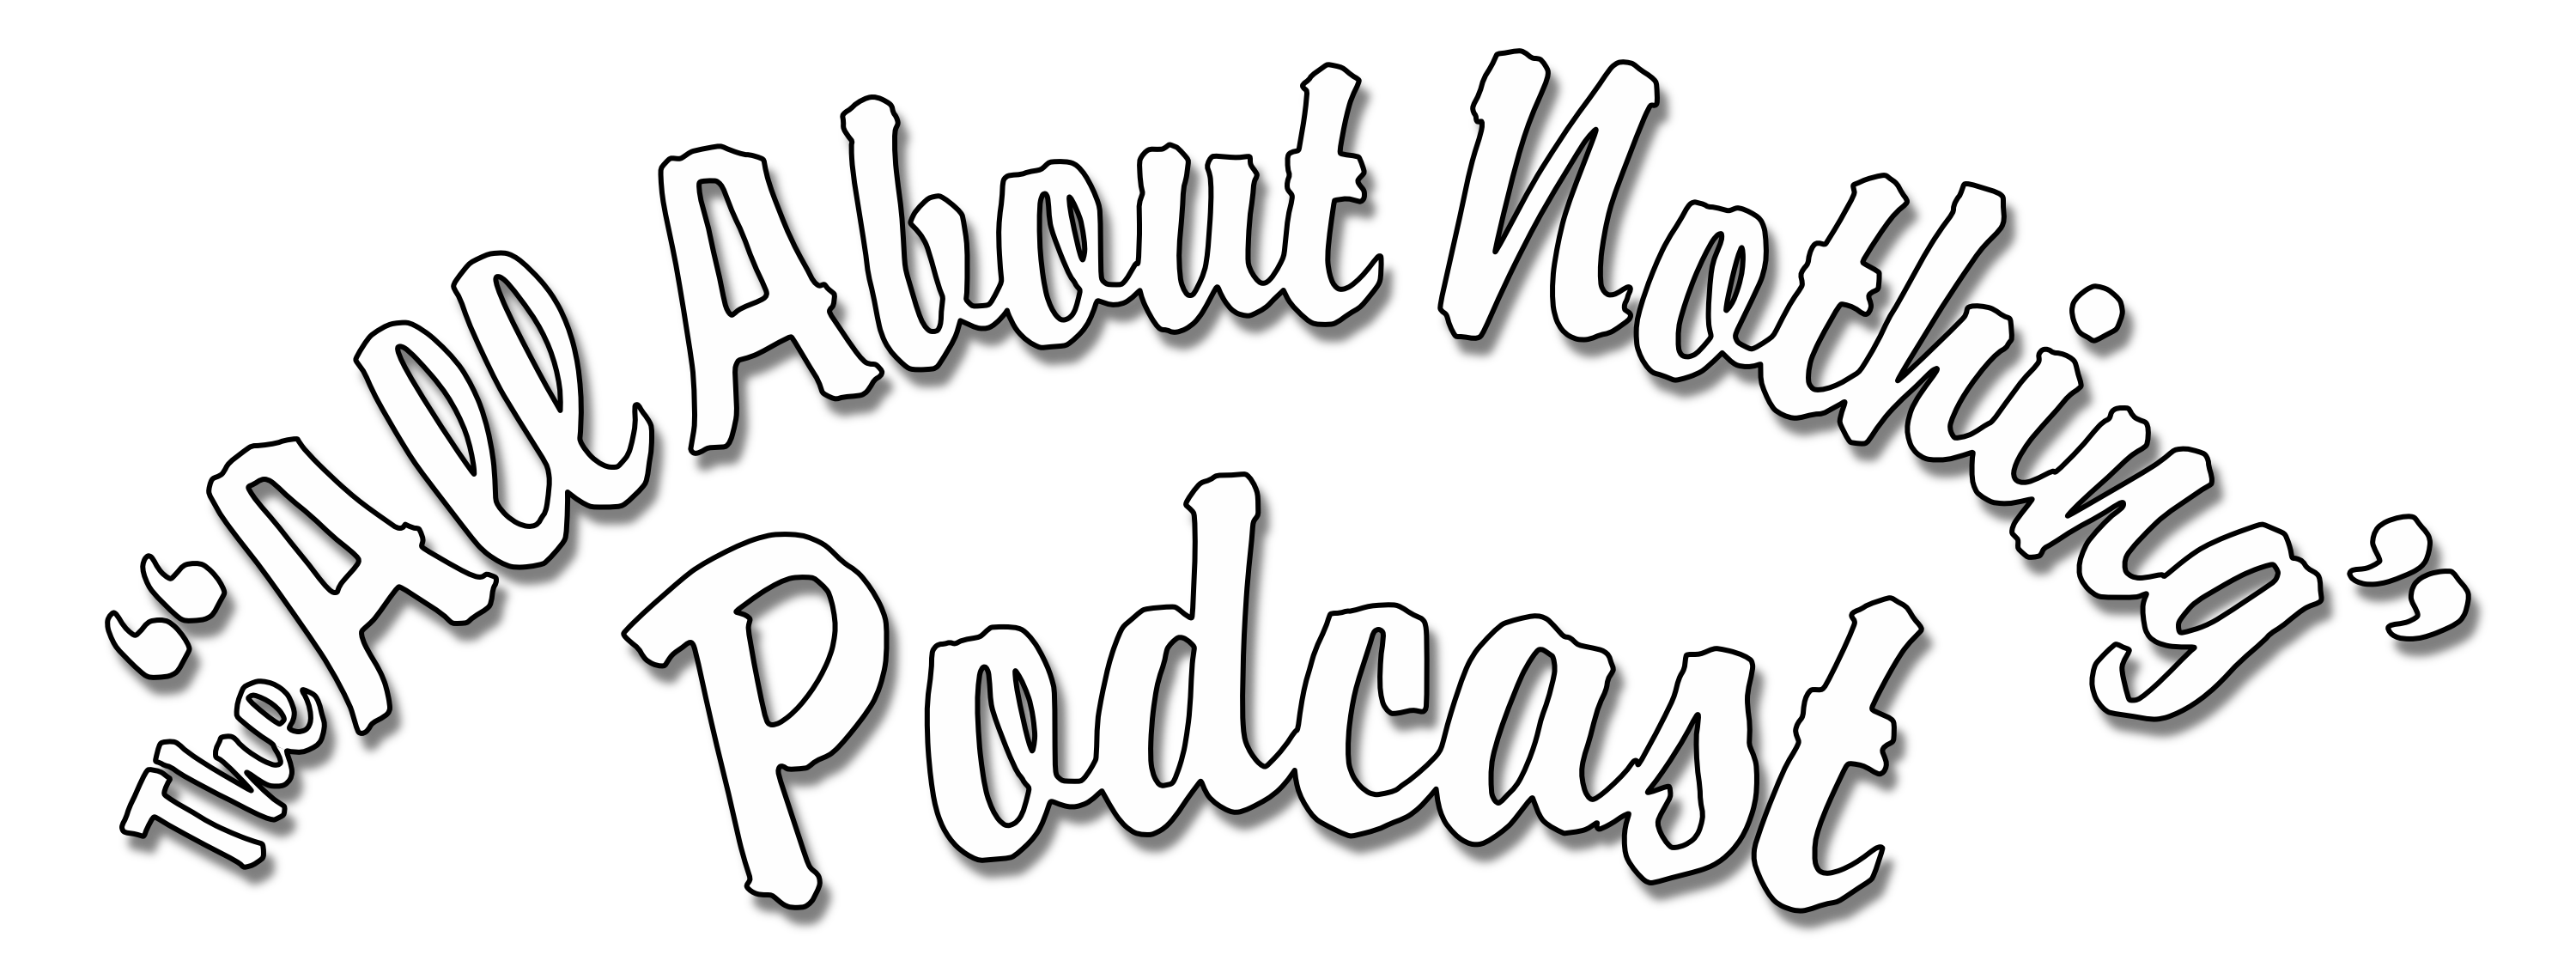 The All About Nothing: Podcast